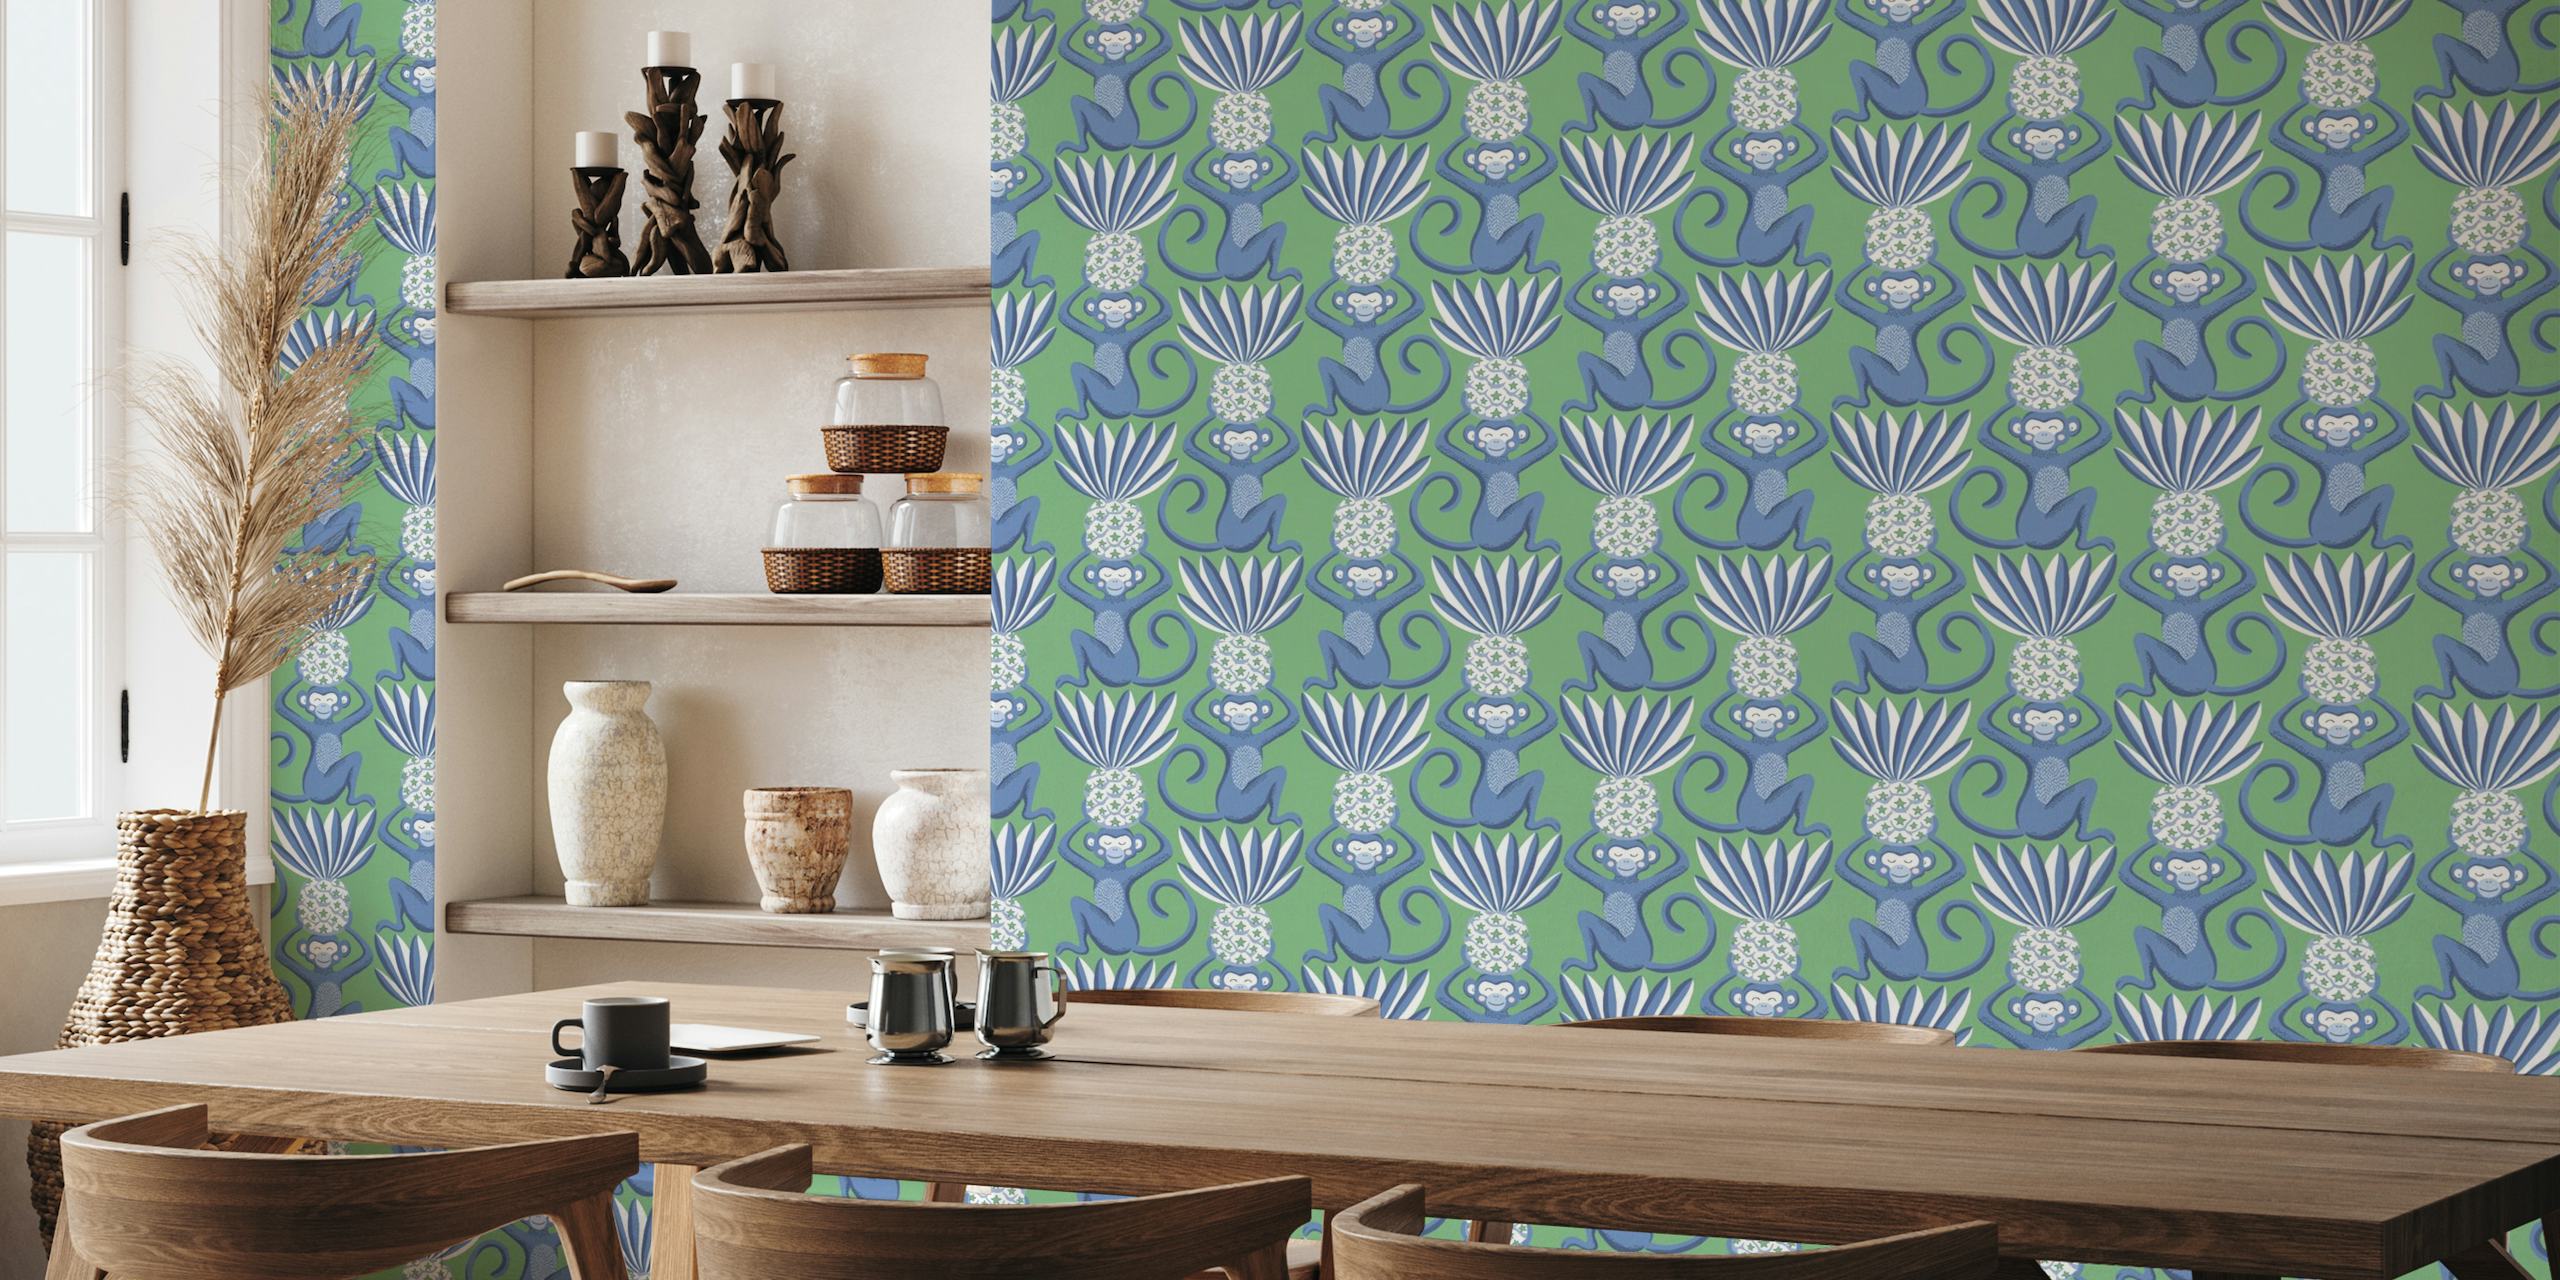 Monkeys and pineapples - blue and green papiers peint